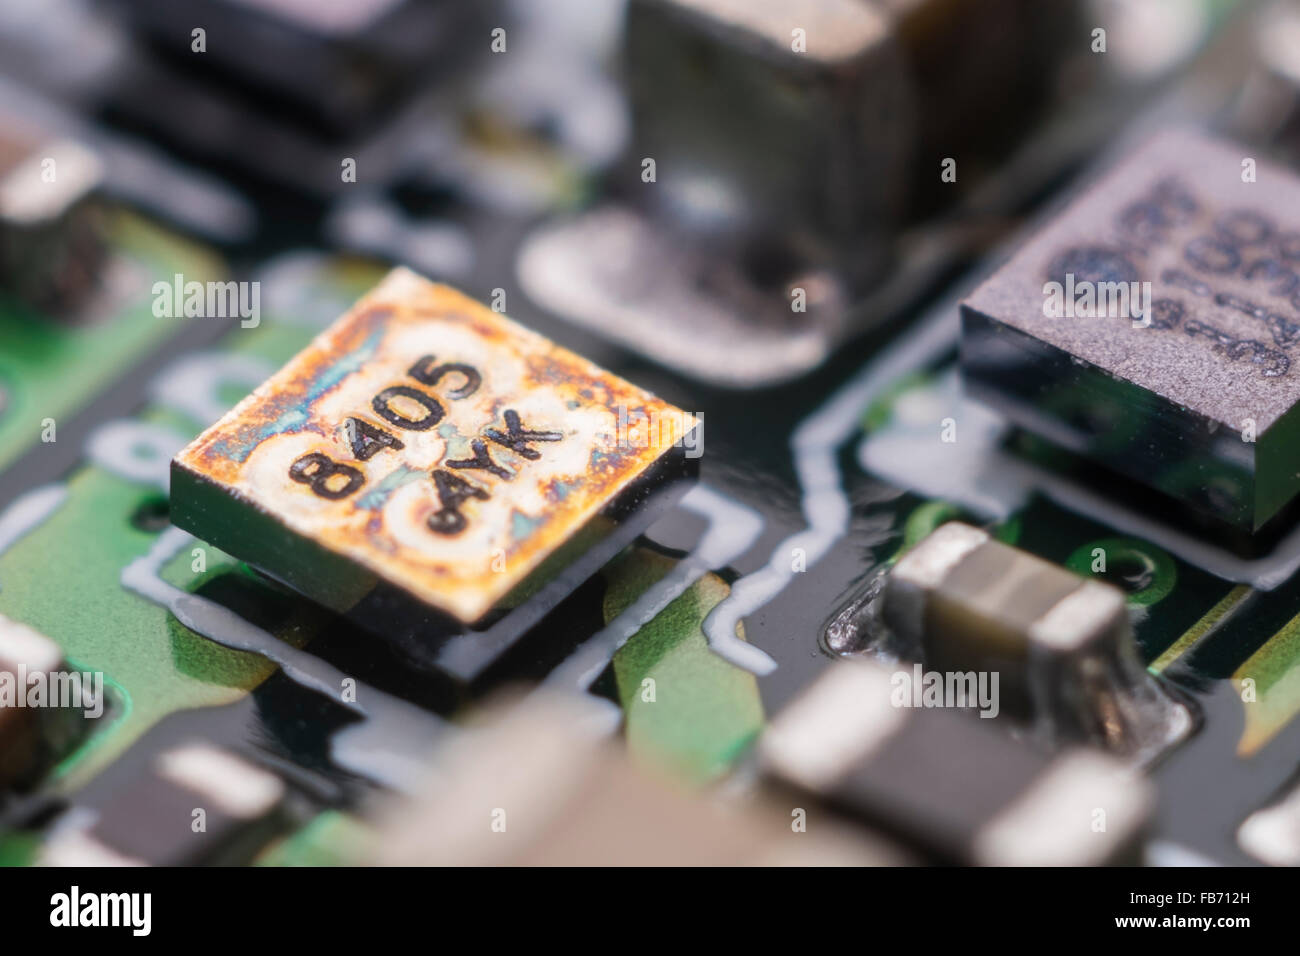 Close-up of chips on a circuit board inside an Apple iPod Nano Stock Photo